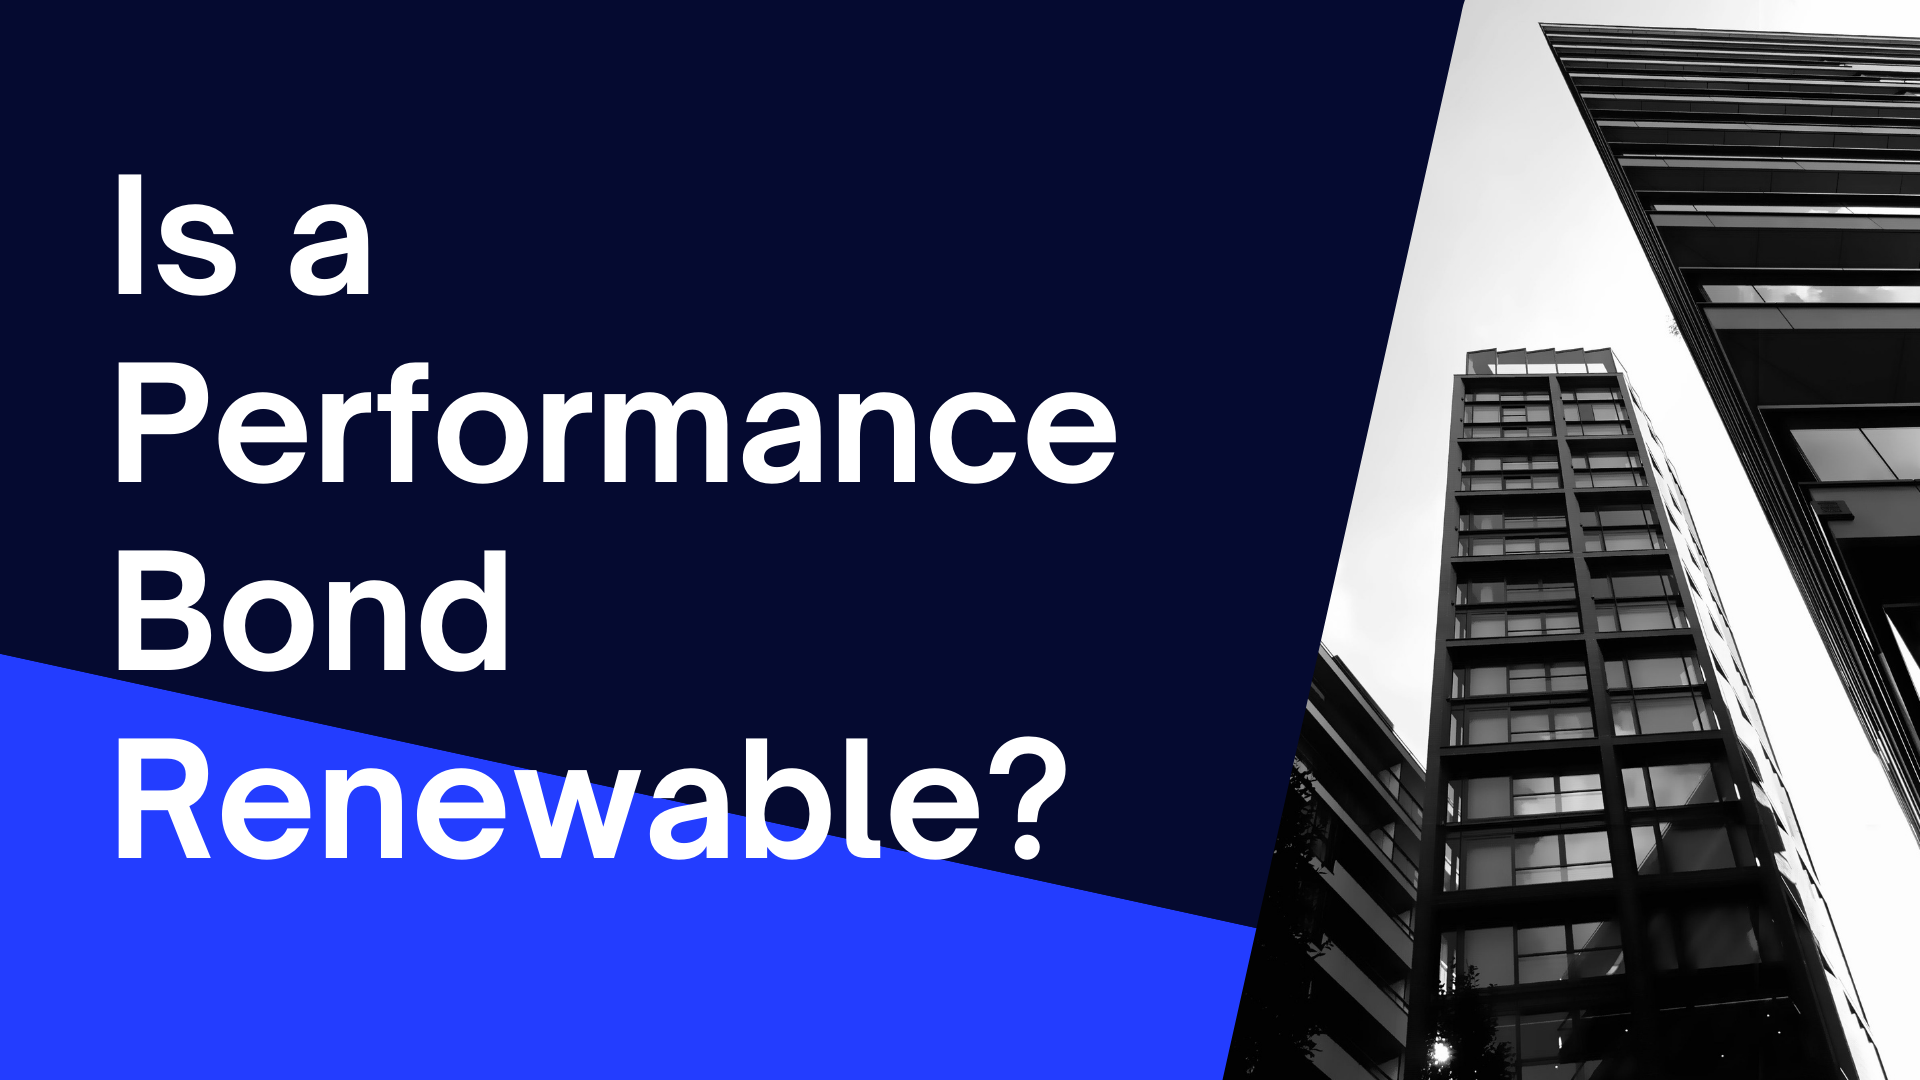 performance bond - Is it possible to renew a performance bond - building with blue and black bg